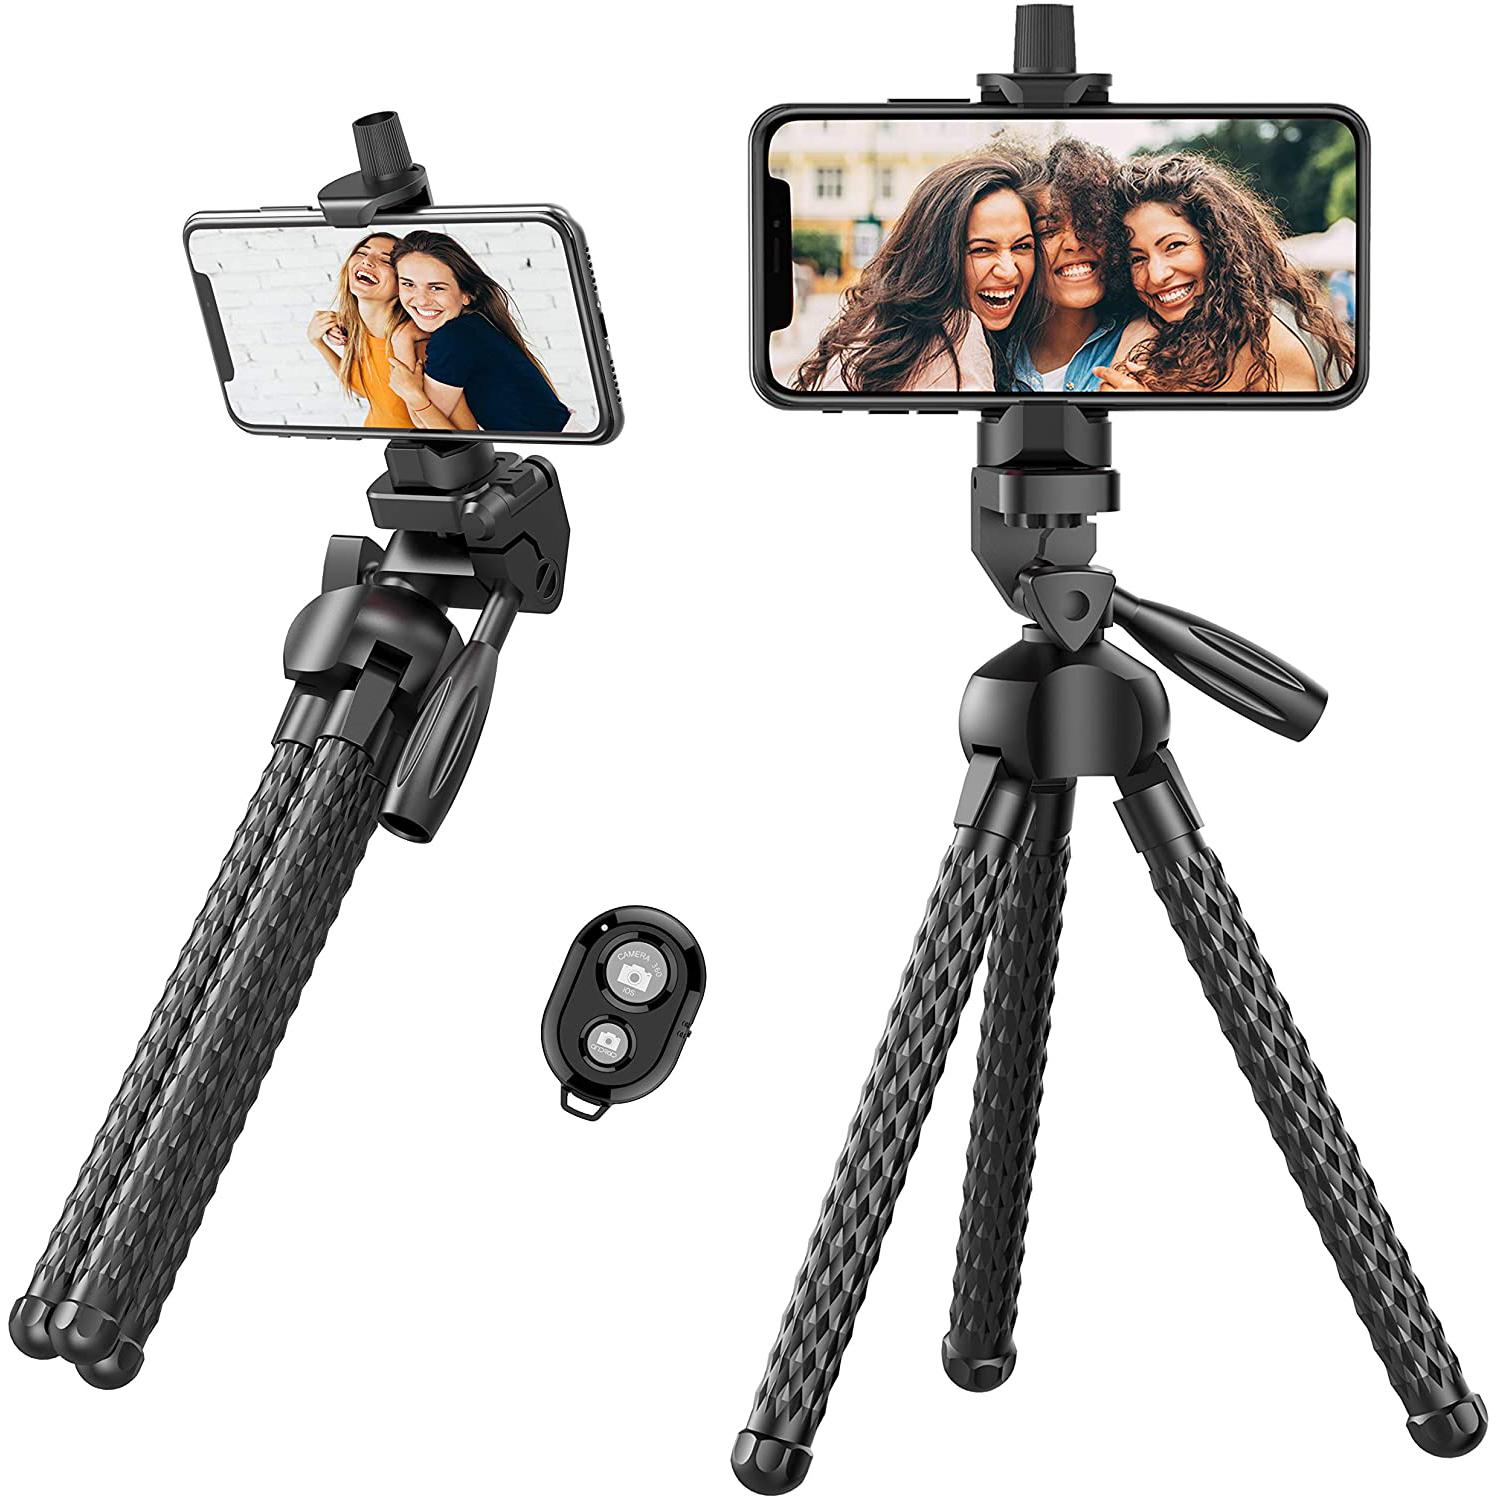 11in Outsolidep Flexible Phone Tripod Stand for $6.88